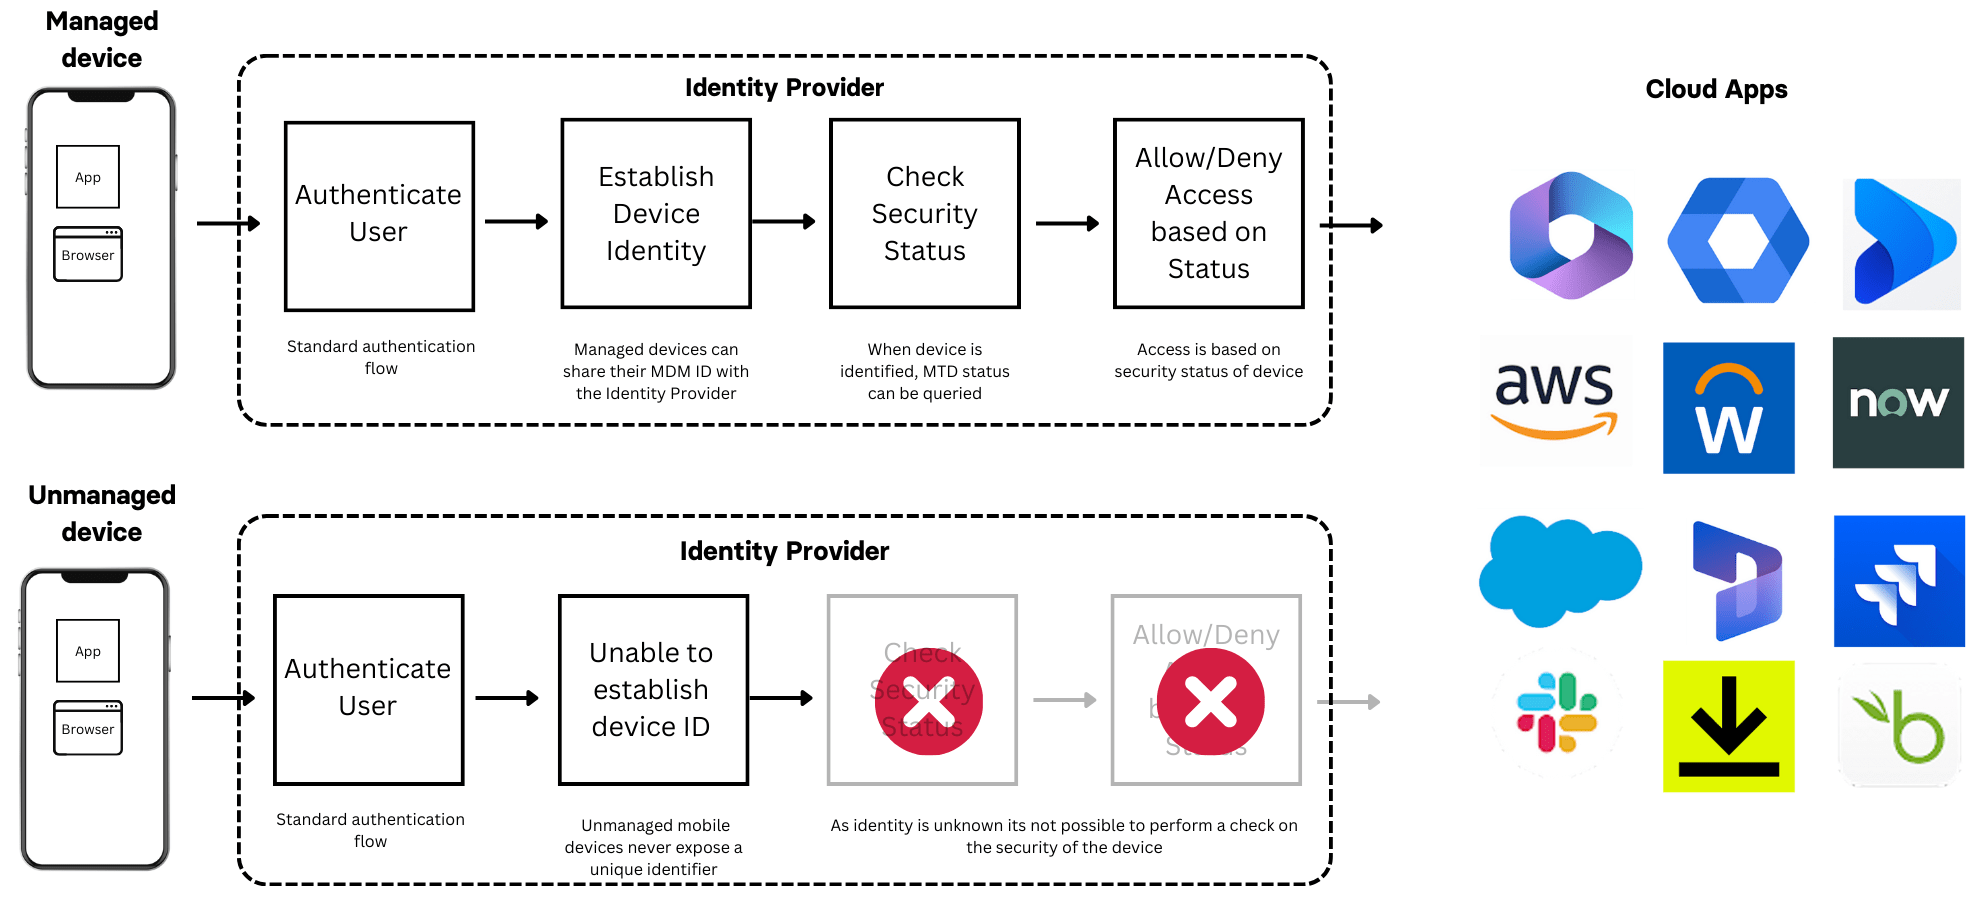 Device identity with managed and unmanaged devices